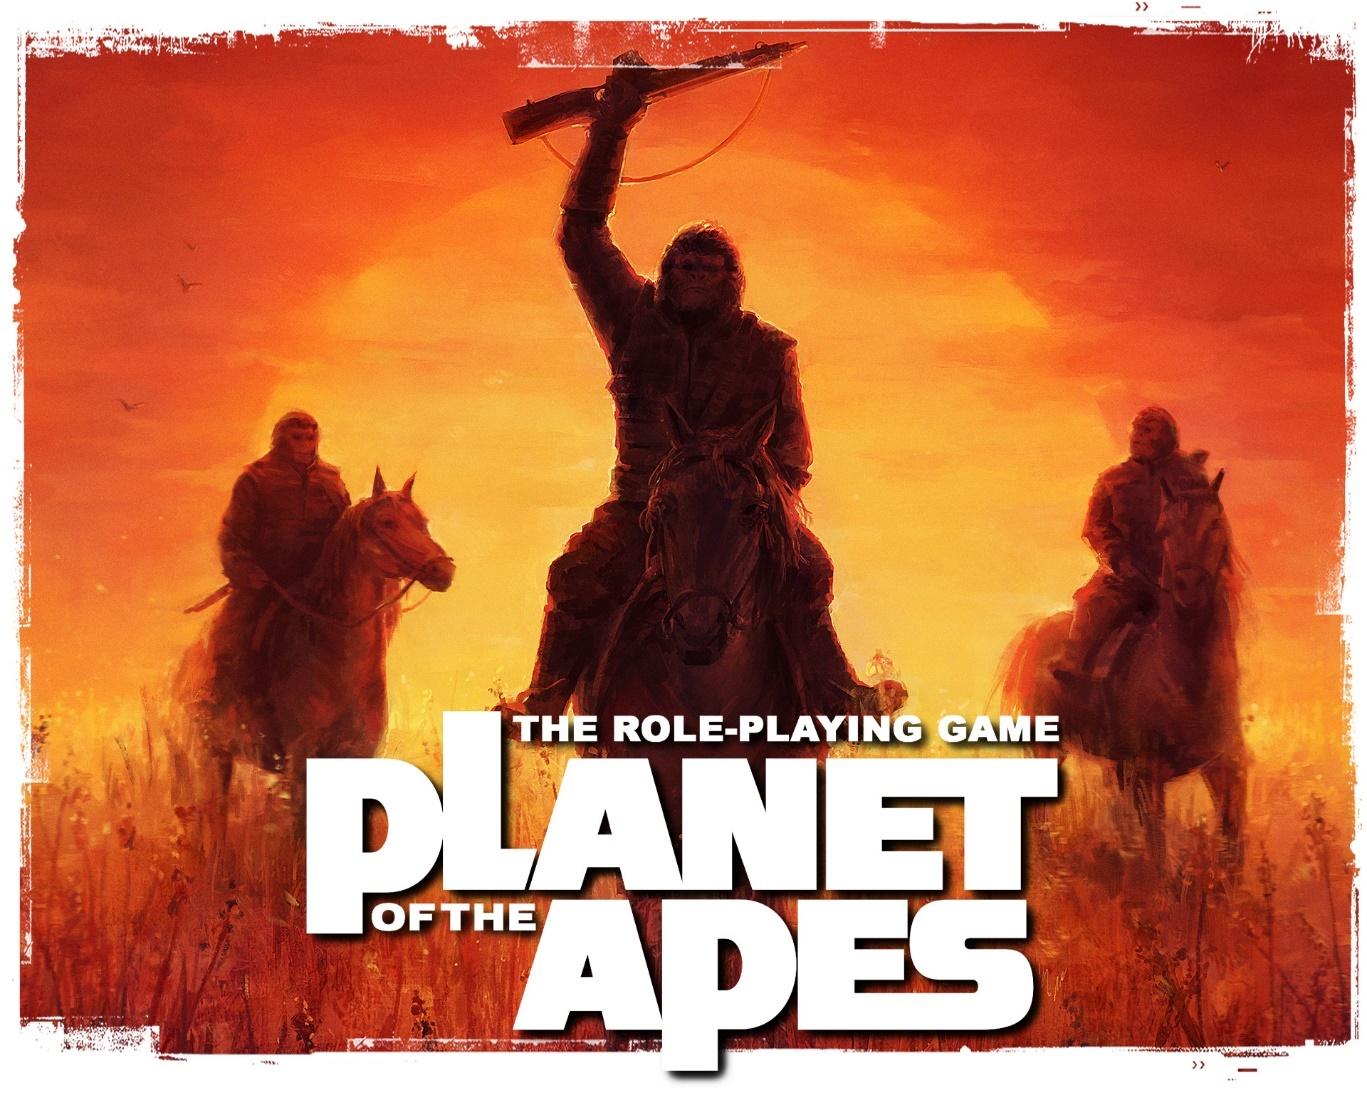 Planet of the Apes TTRPG art